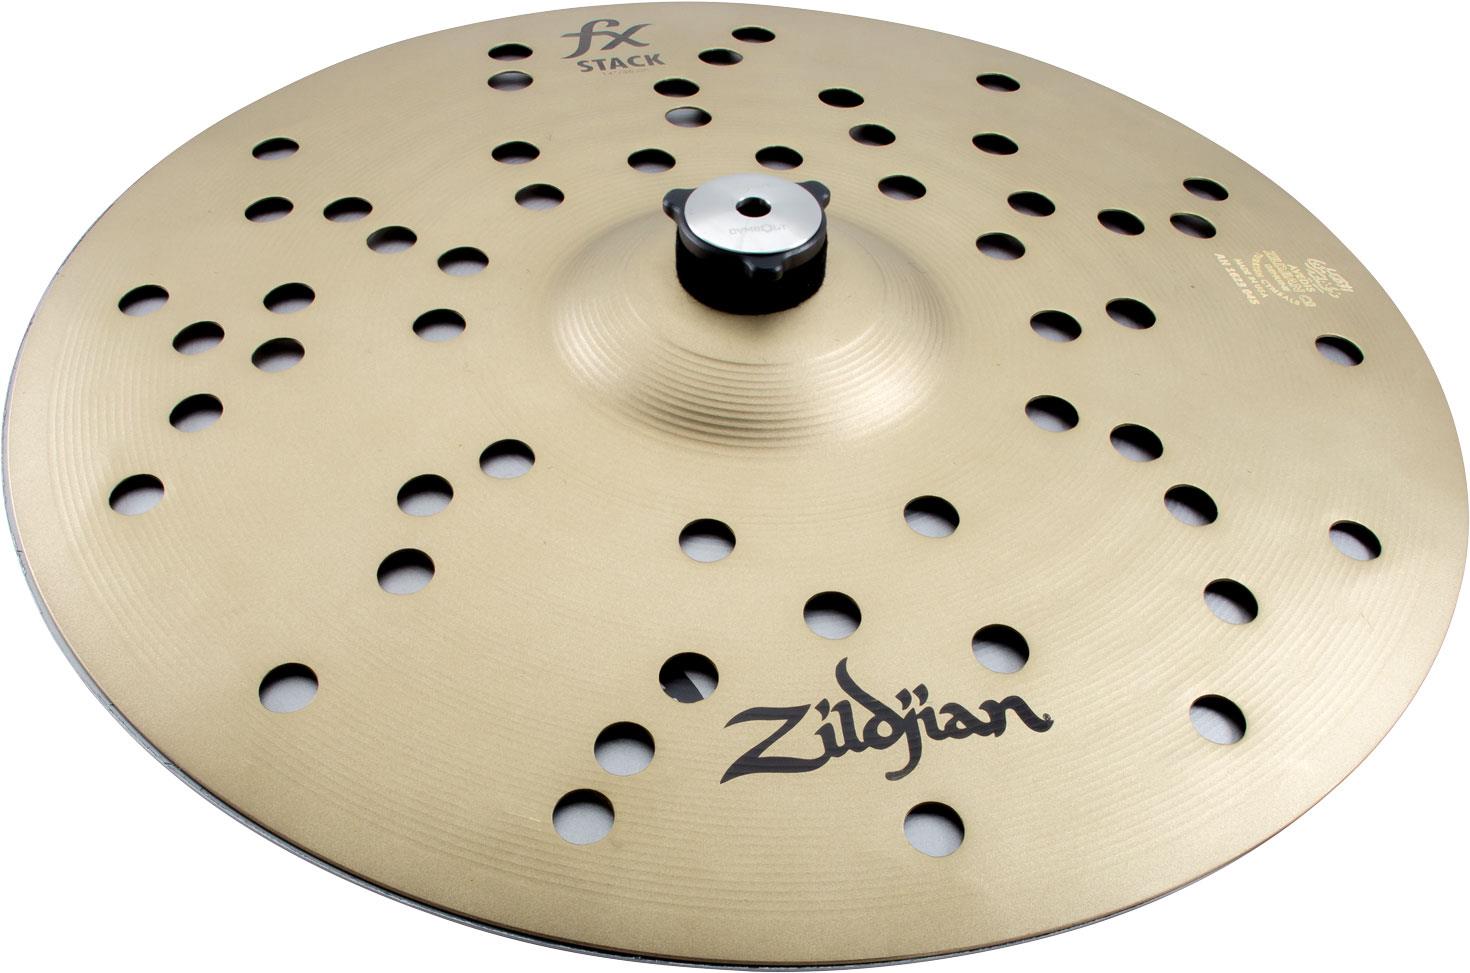 ZILDJIAN FX Stack Cymbals w/ Mount (Available in various sizes)